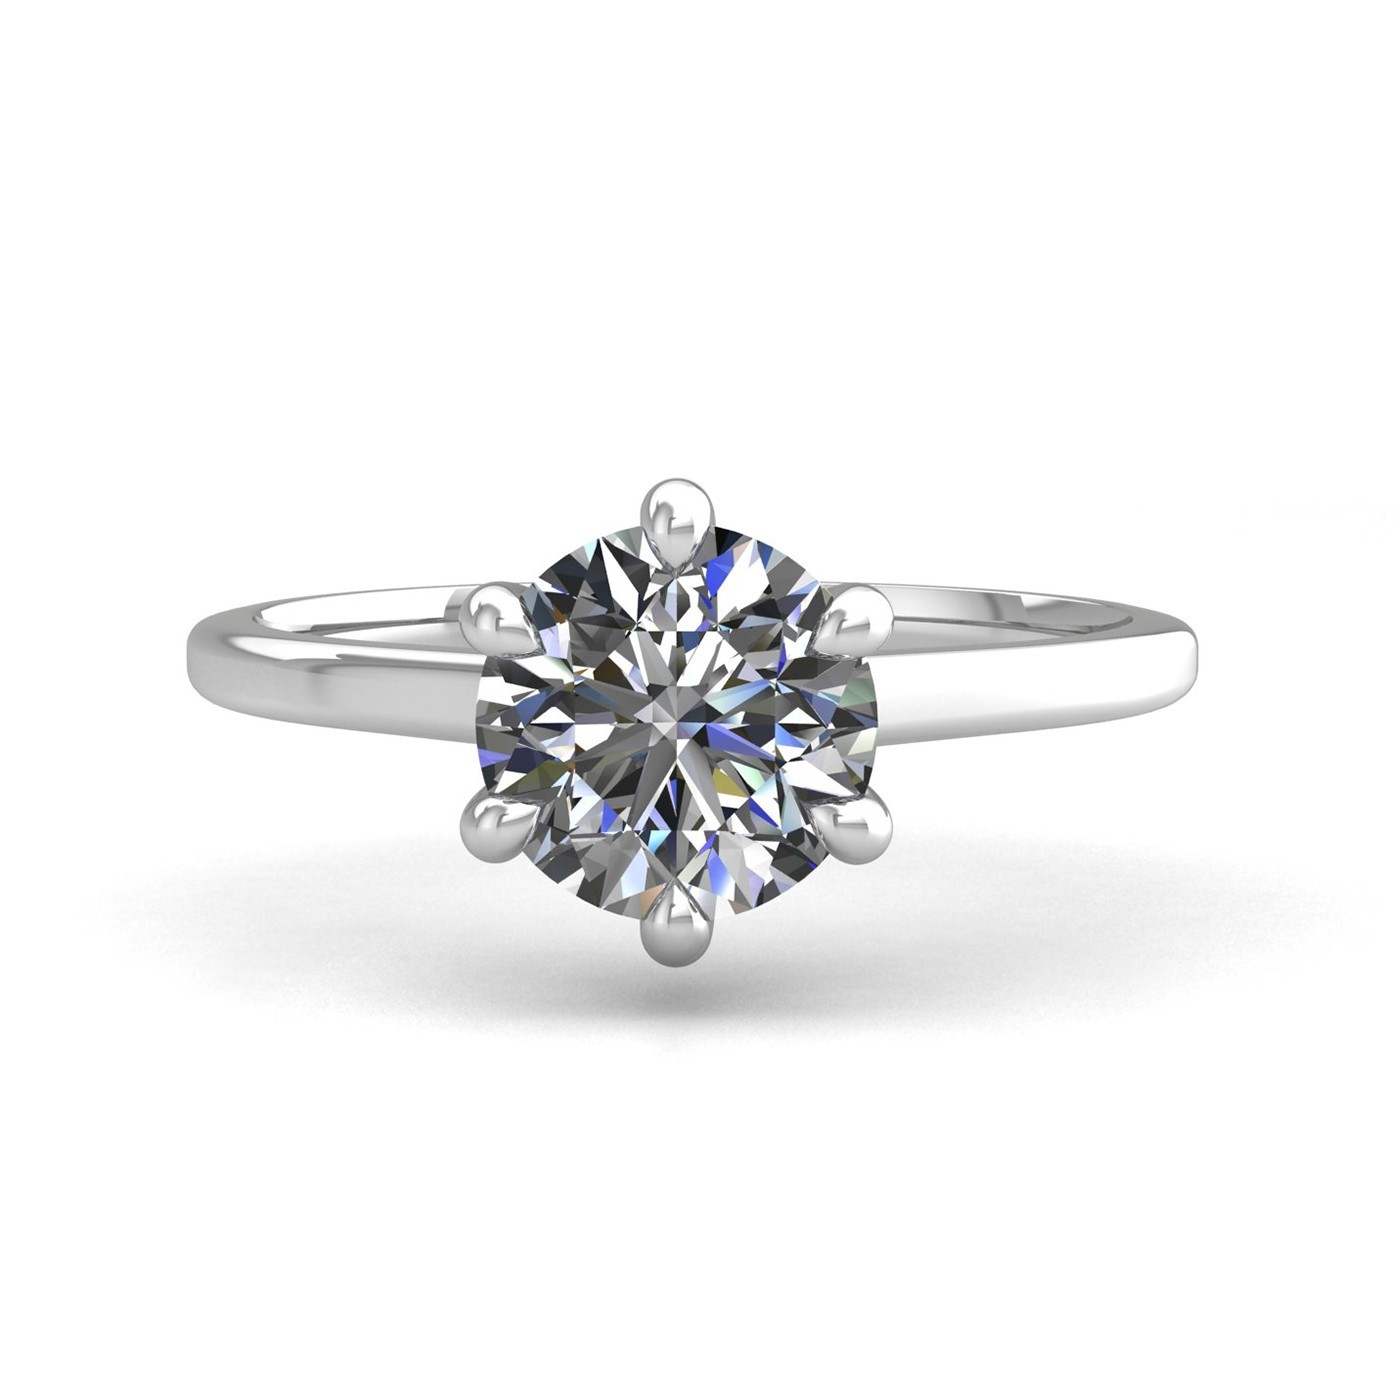 18k white gold 0,30 ct 6 prongs solitaire round cut diamond engagement ring with whisper thin band Photos & images